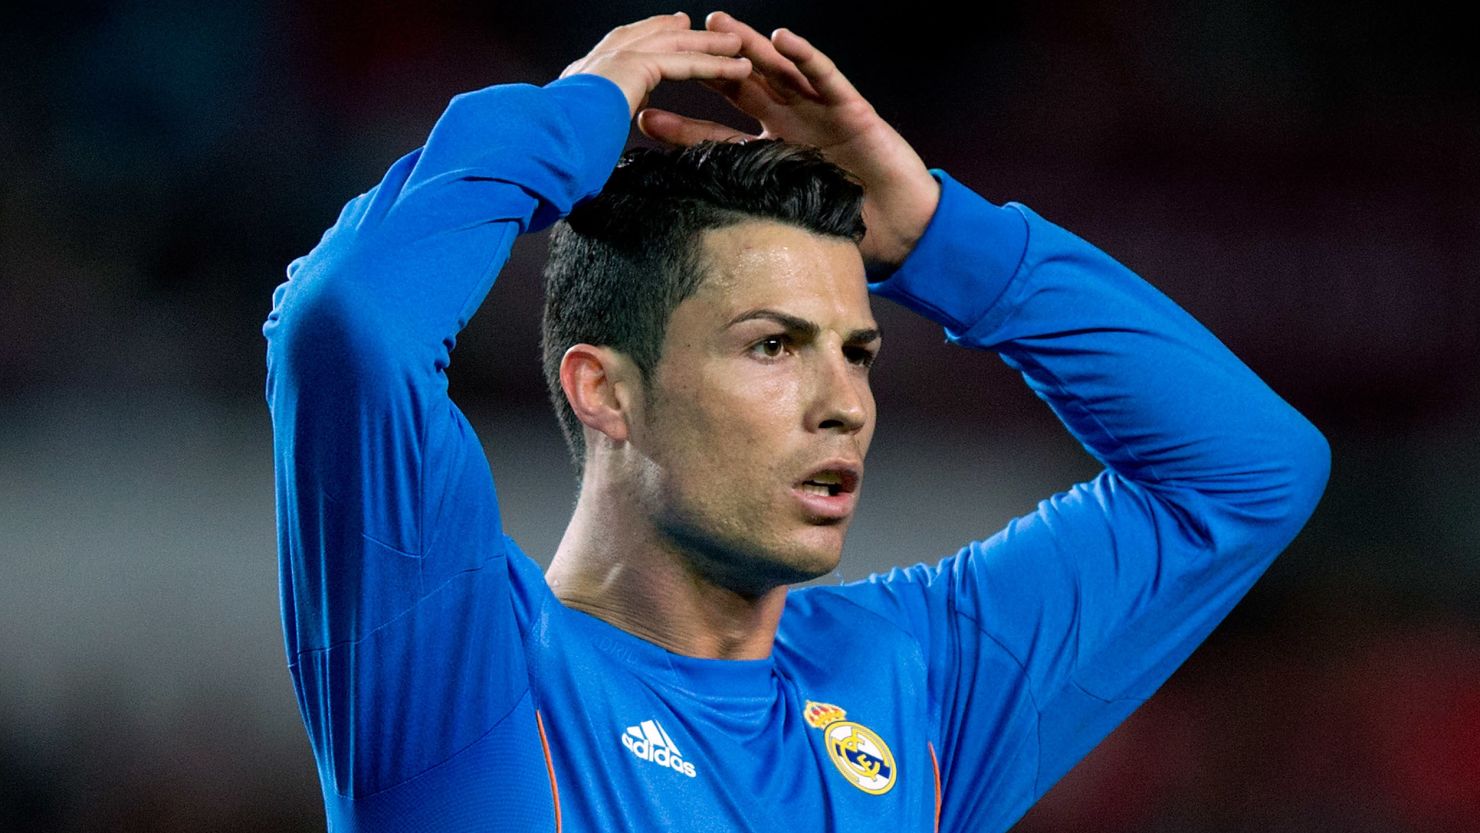 Cristiano Ronaldo's Real Madrid lost their second match in four days in Spain's La Liga.